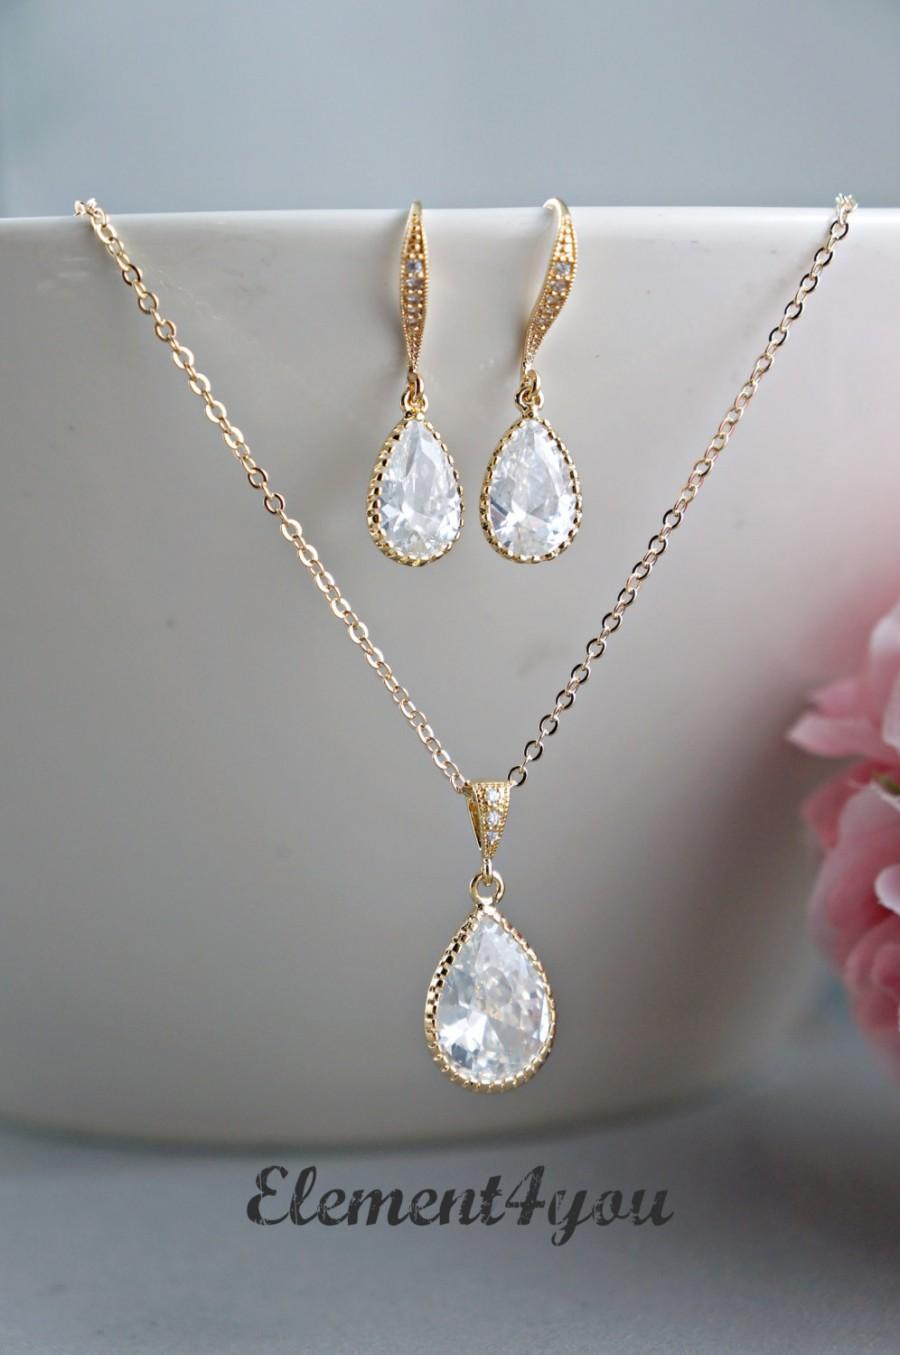 Hochzeit - Wedding bridal jewelry set, Bridesmaid necklace earrings, Pear drop Cubic Zirconia pendant CZ Earrings Bridal party gift Delicate goldchain